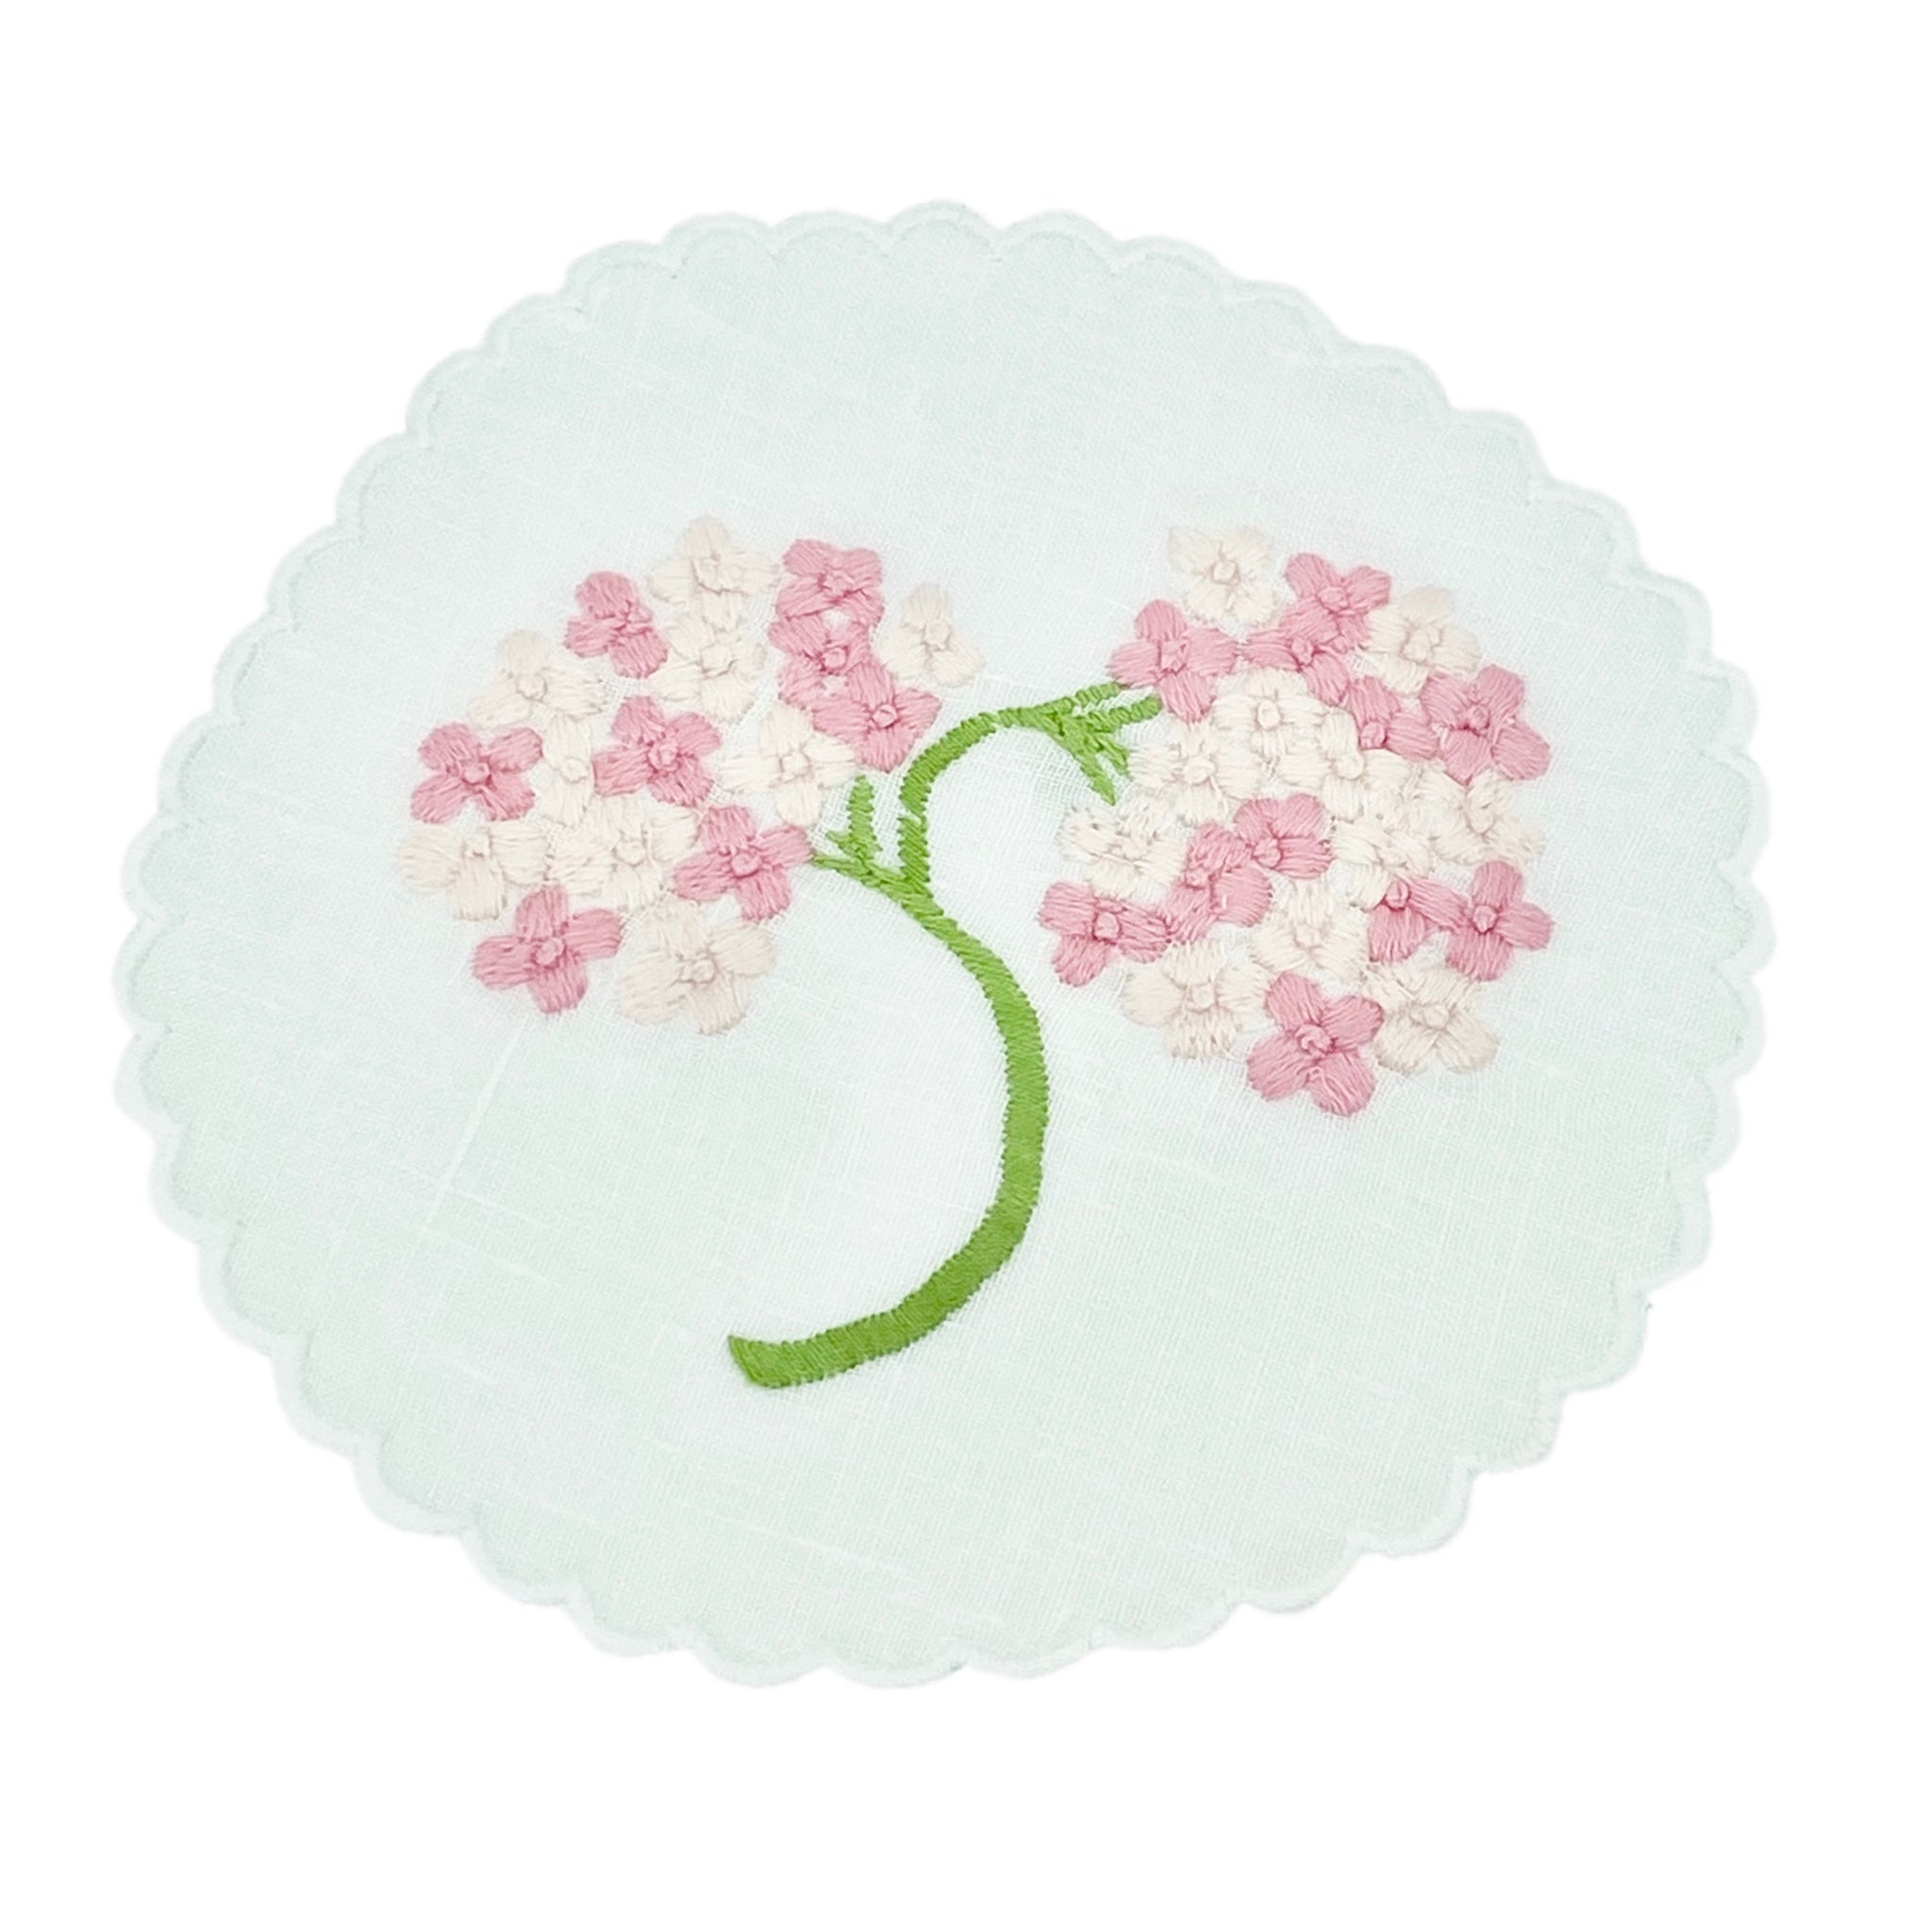 Embroidered Hydrangea Coaster Set in Pink